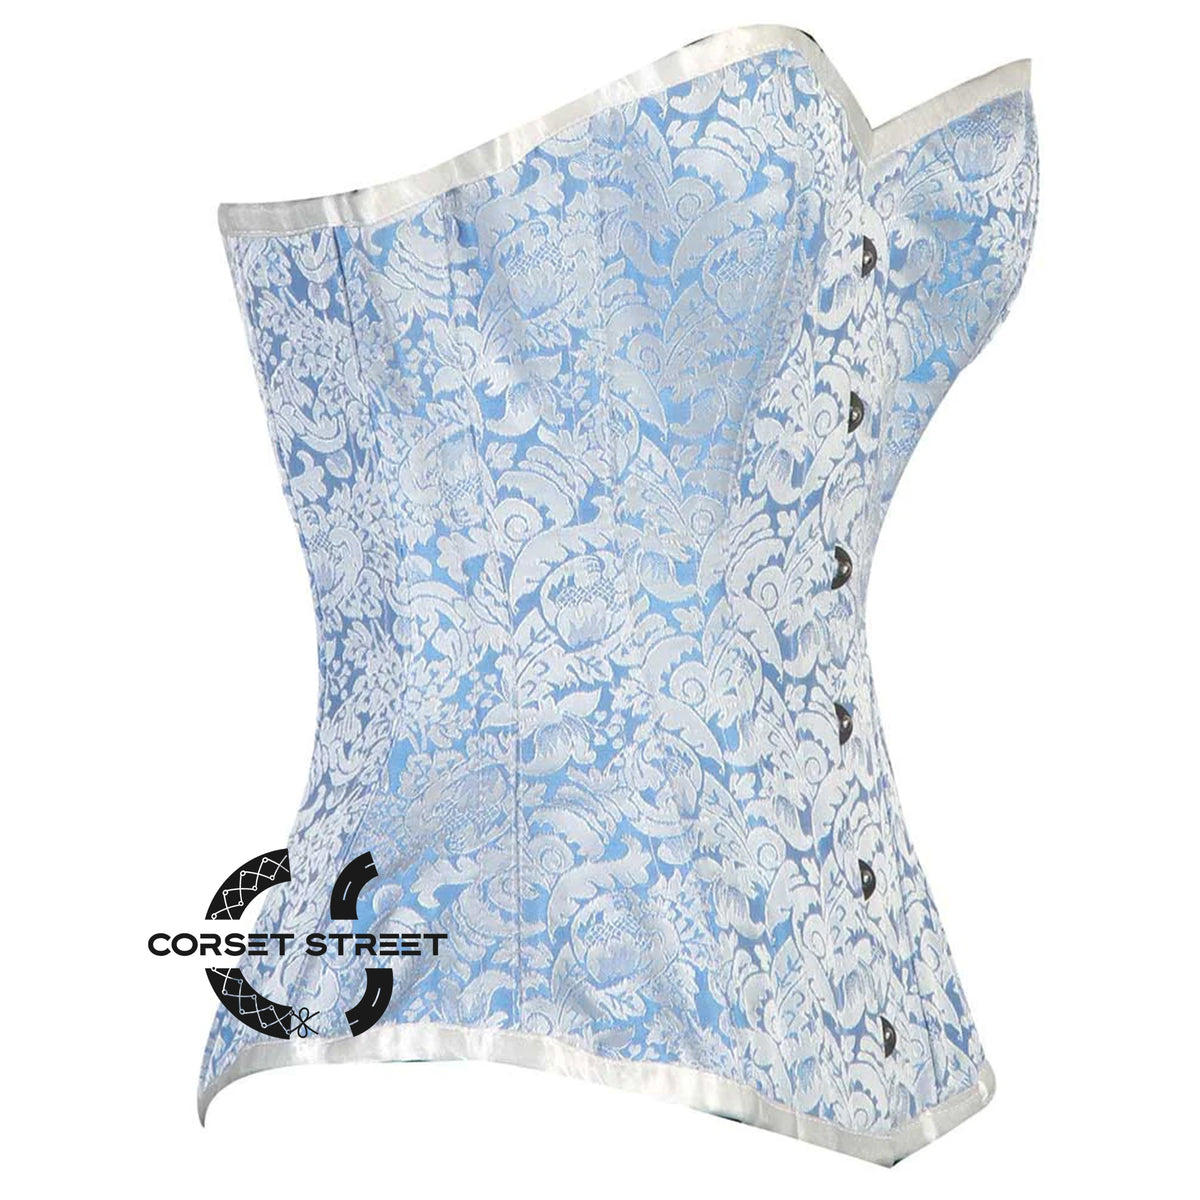 Blue And White Brocade Burlesque Gothic Overbust Corset Bustier Top